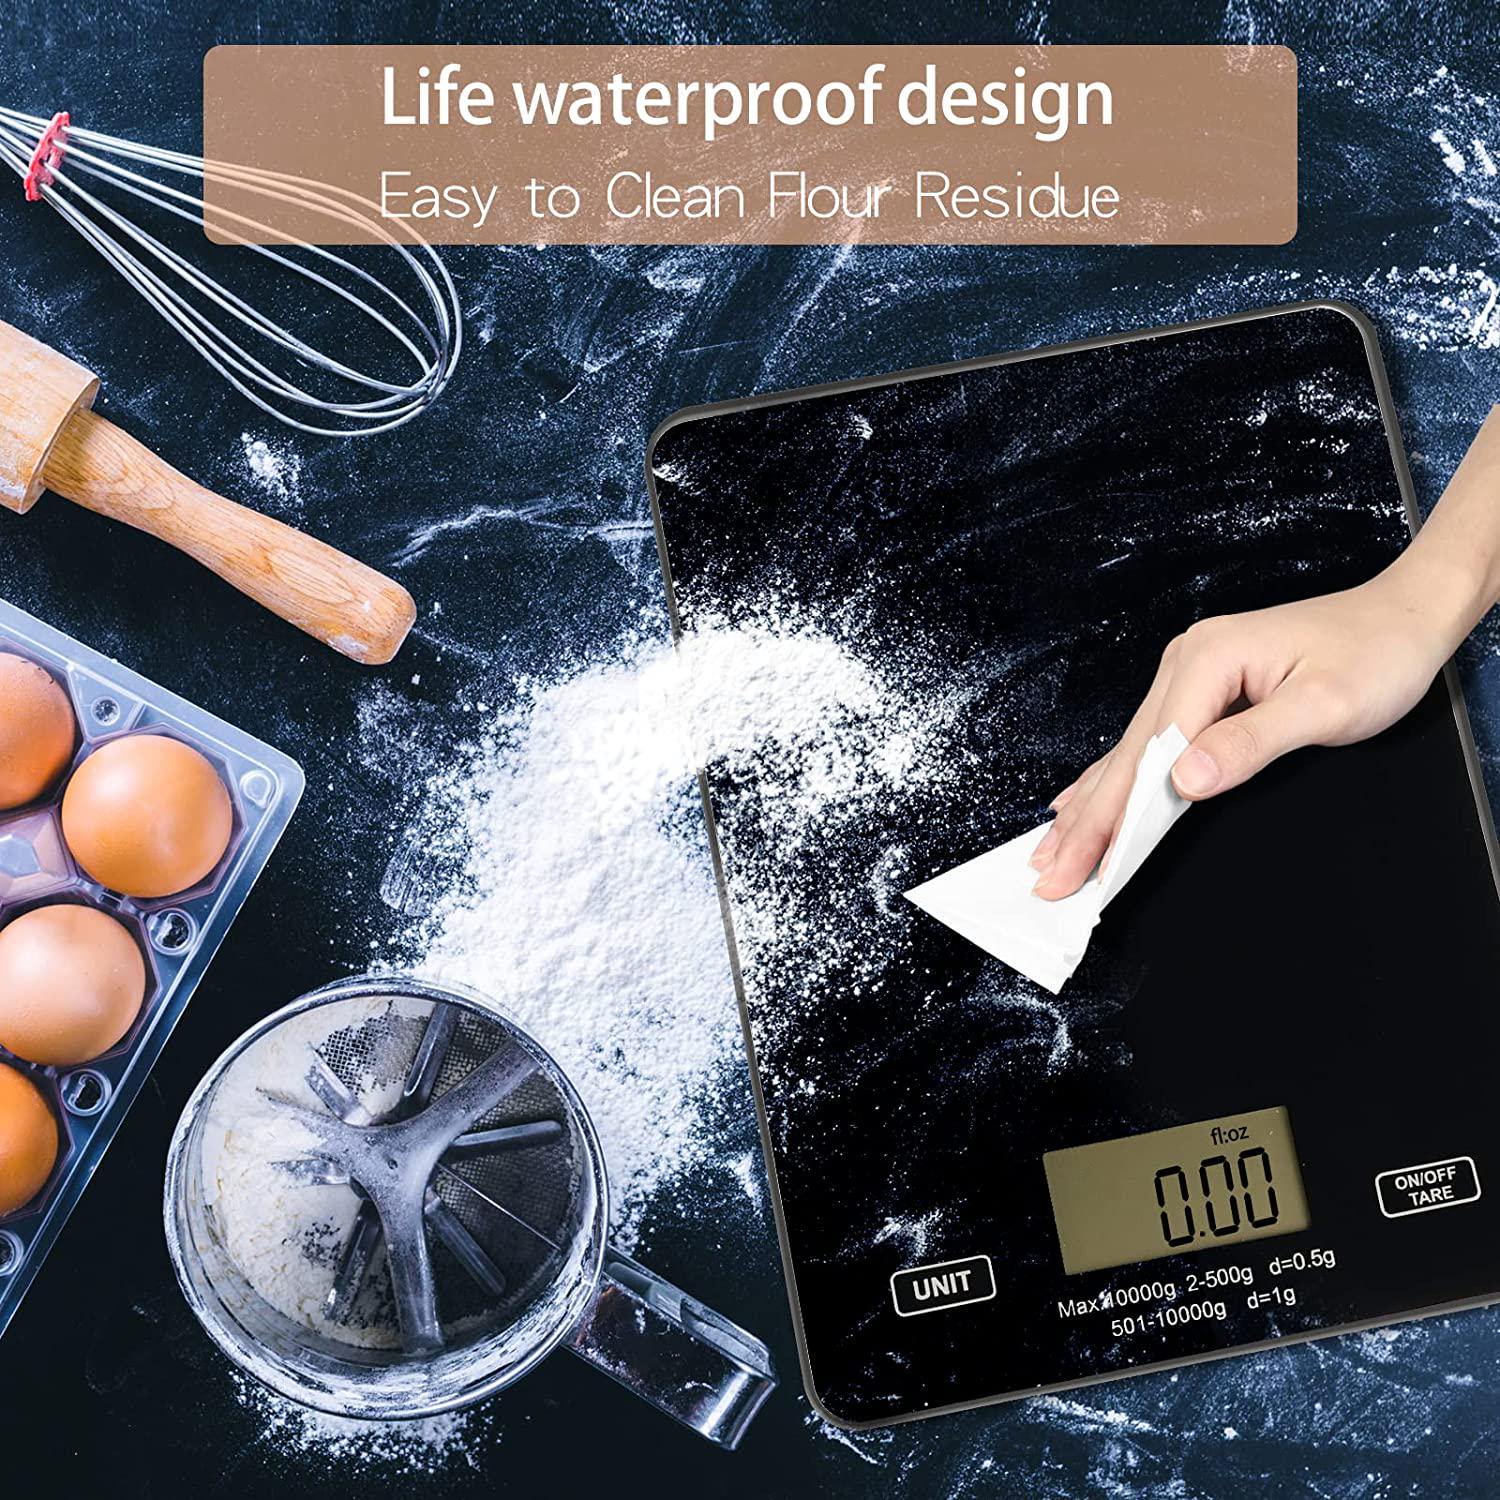 Rubruel, Kitchen Scale Digital Food Scale 10kg/22lb-USB Charging with Waterproof Tempered Glass Platform for Weight Loss Cooking and Coffee with LCD Display High Accuracy (Black)